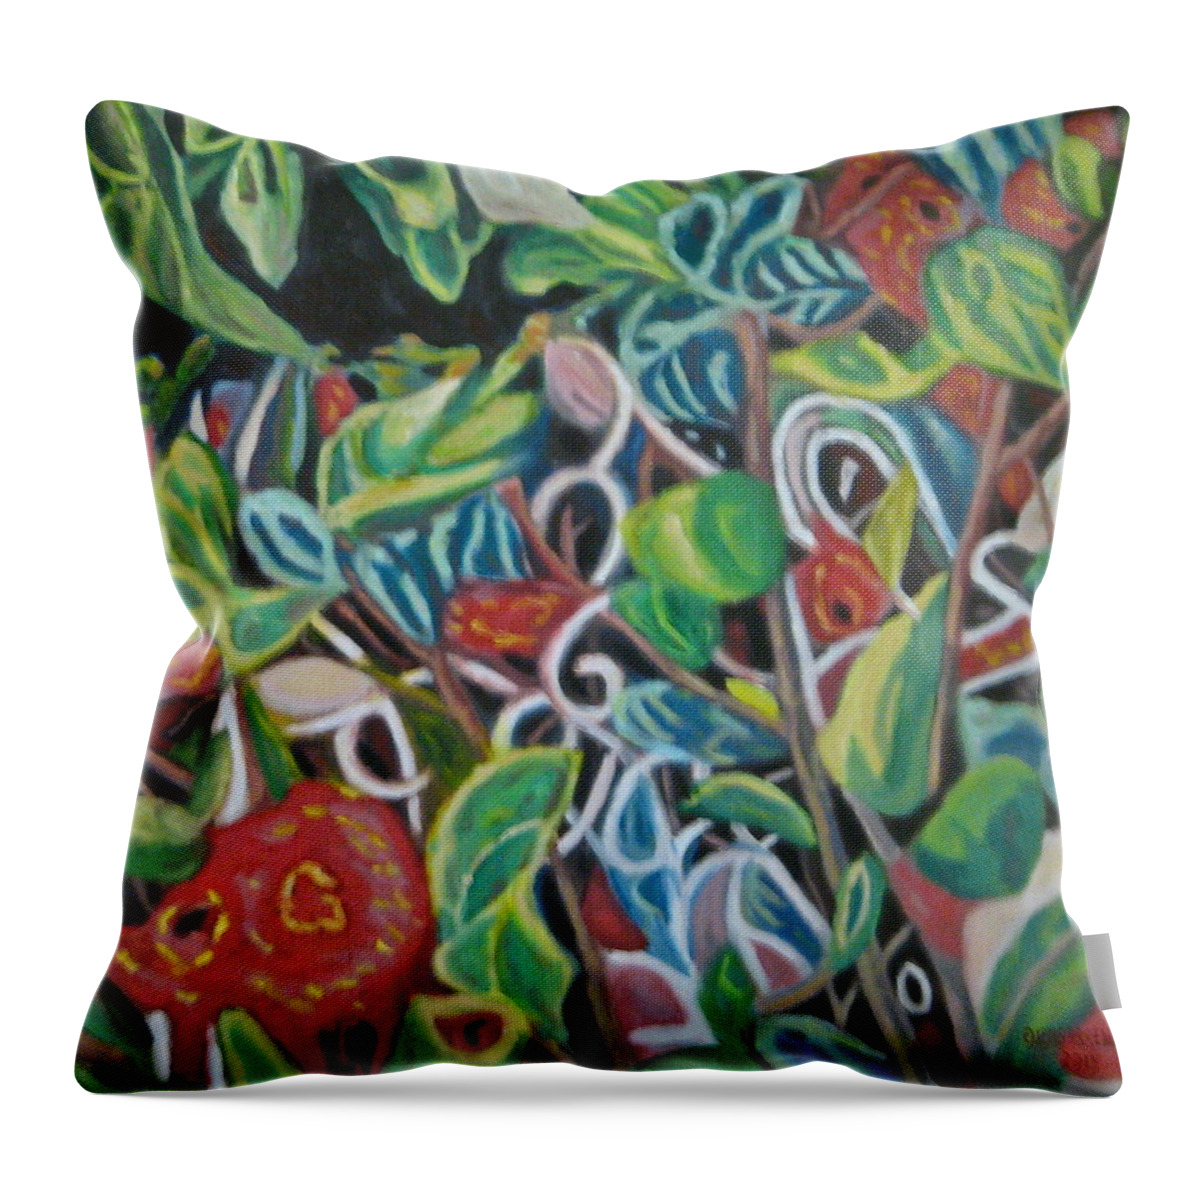 Flowers Abstraction Nature Throw Pillow featuring the painting Pulse by Enrique Ojembarrena